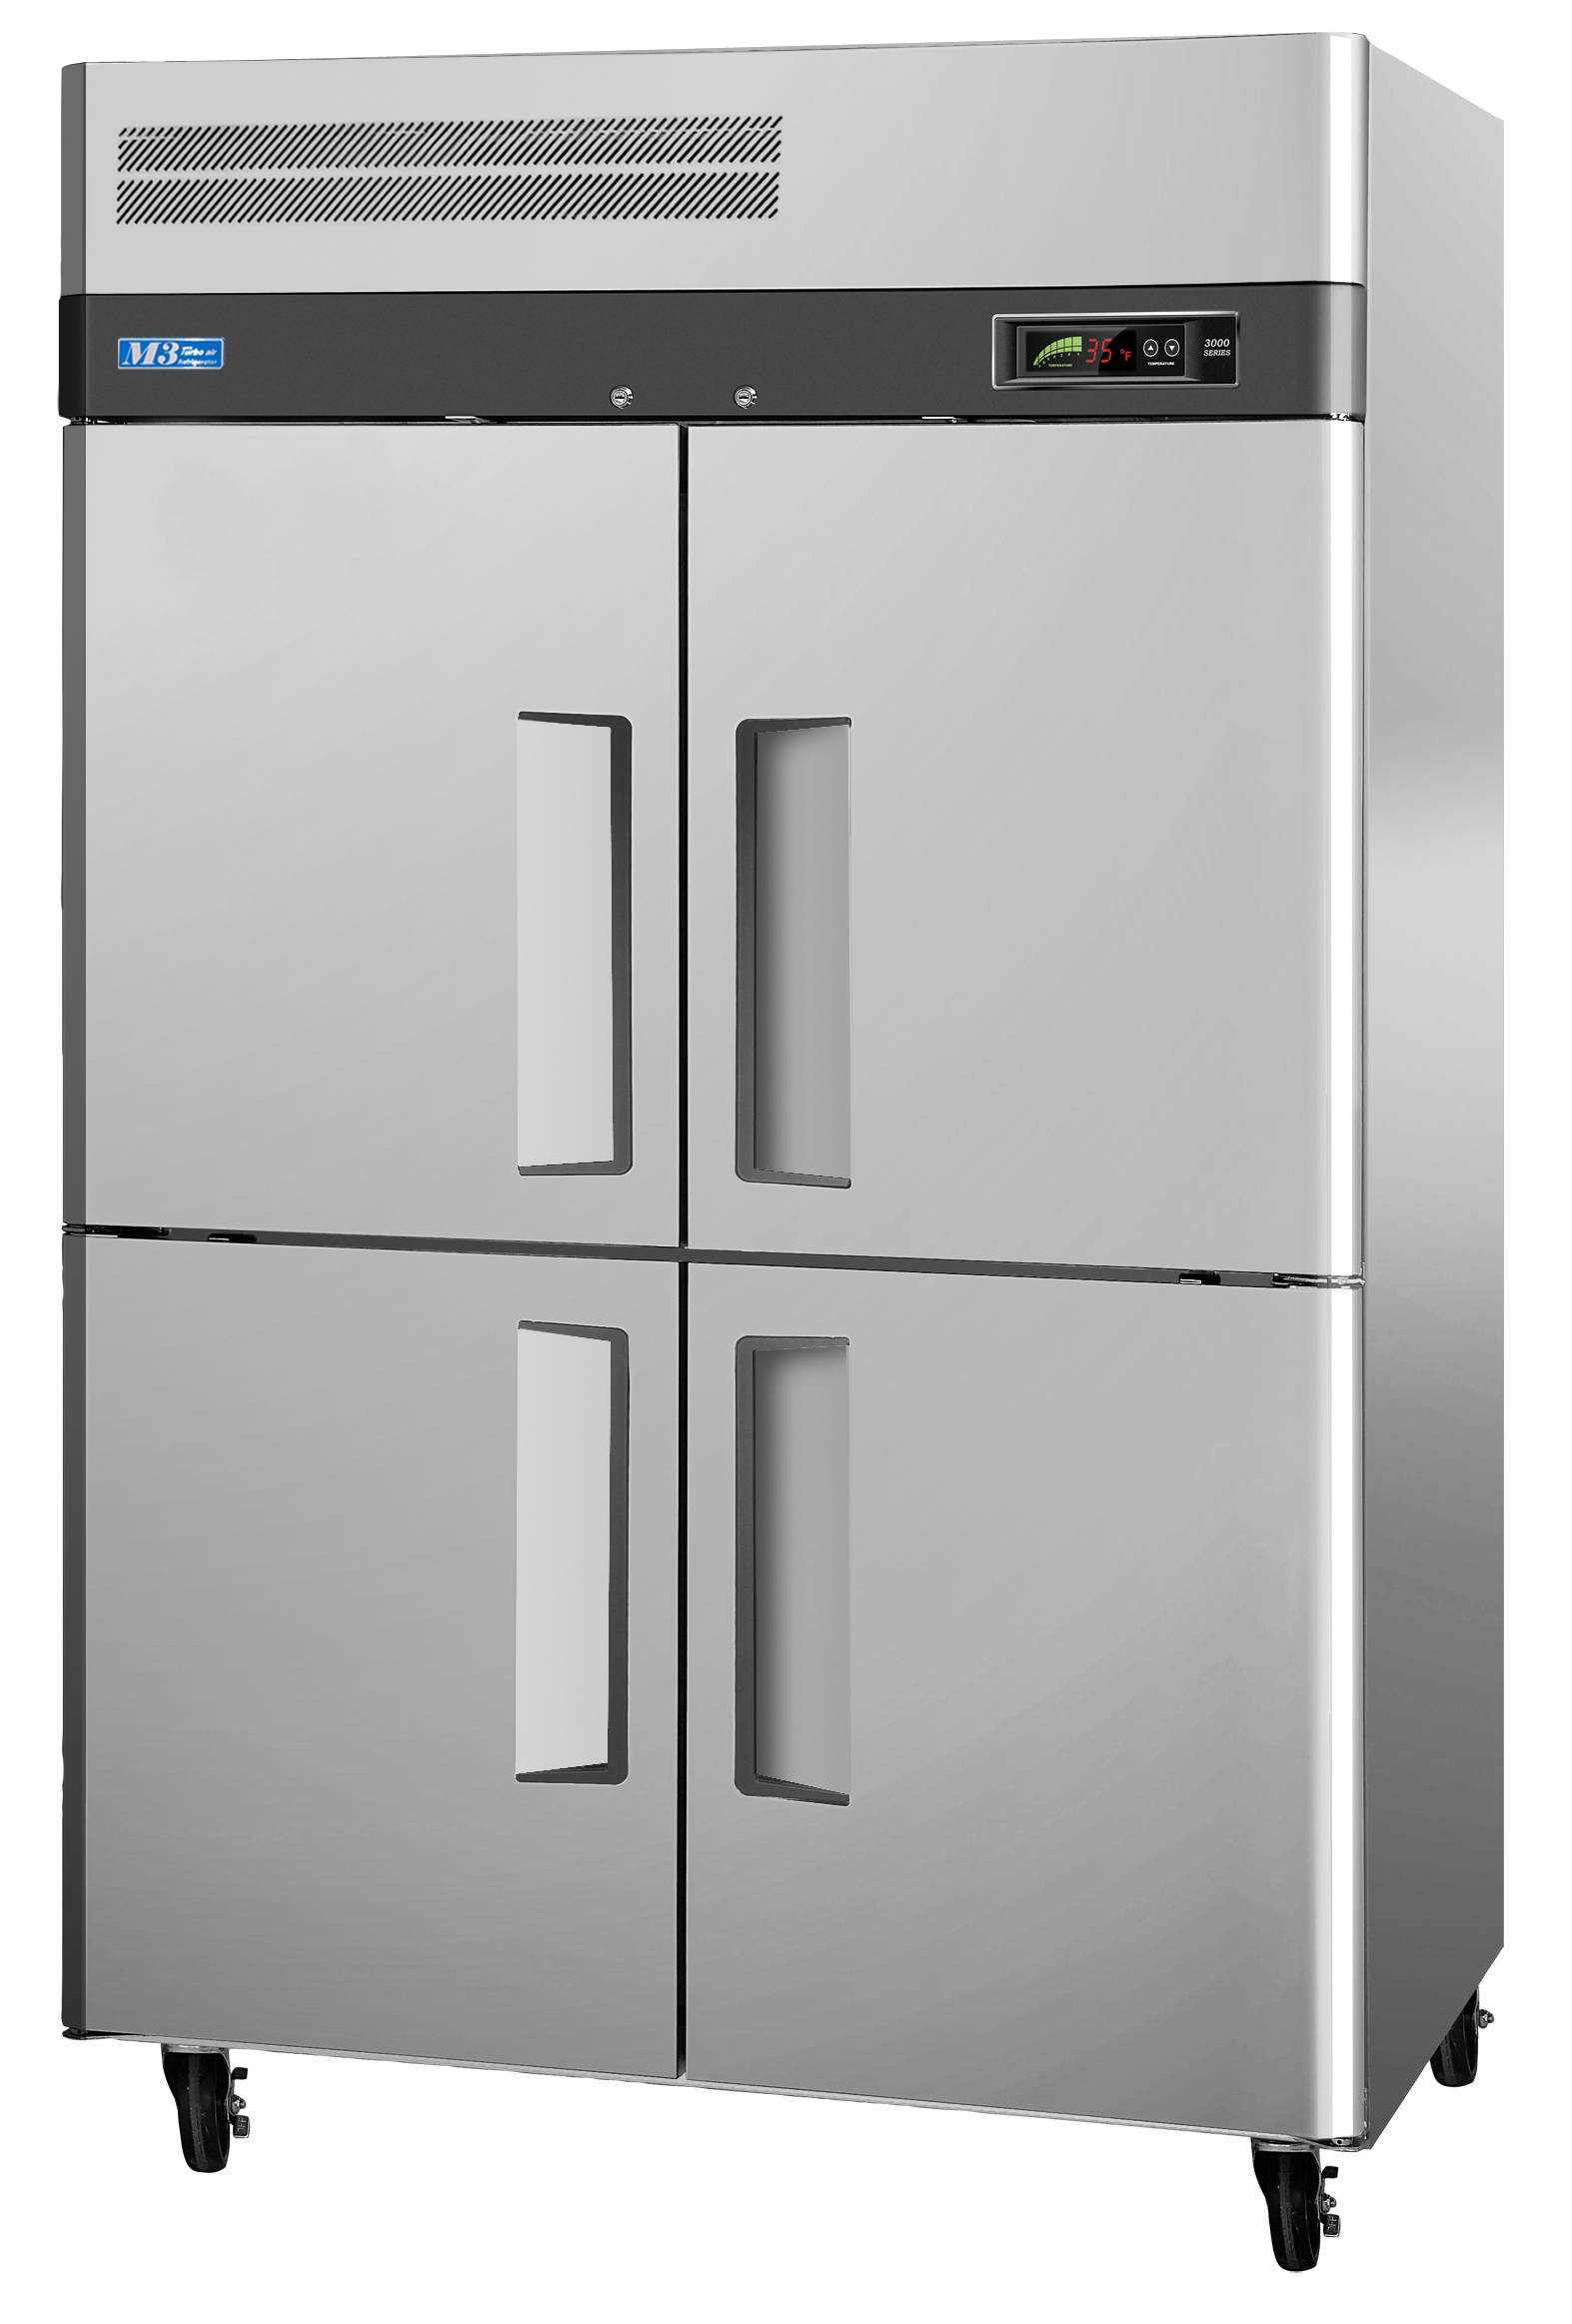 M3 Refrigerator, reach-in, two-section